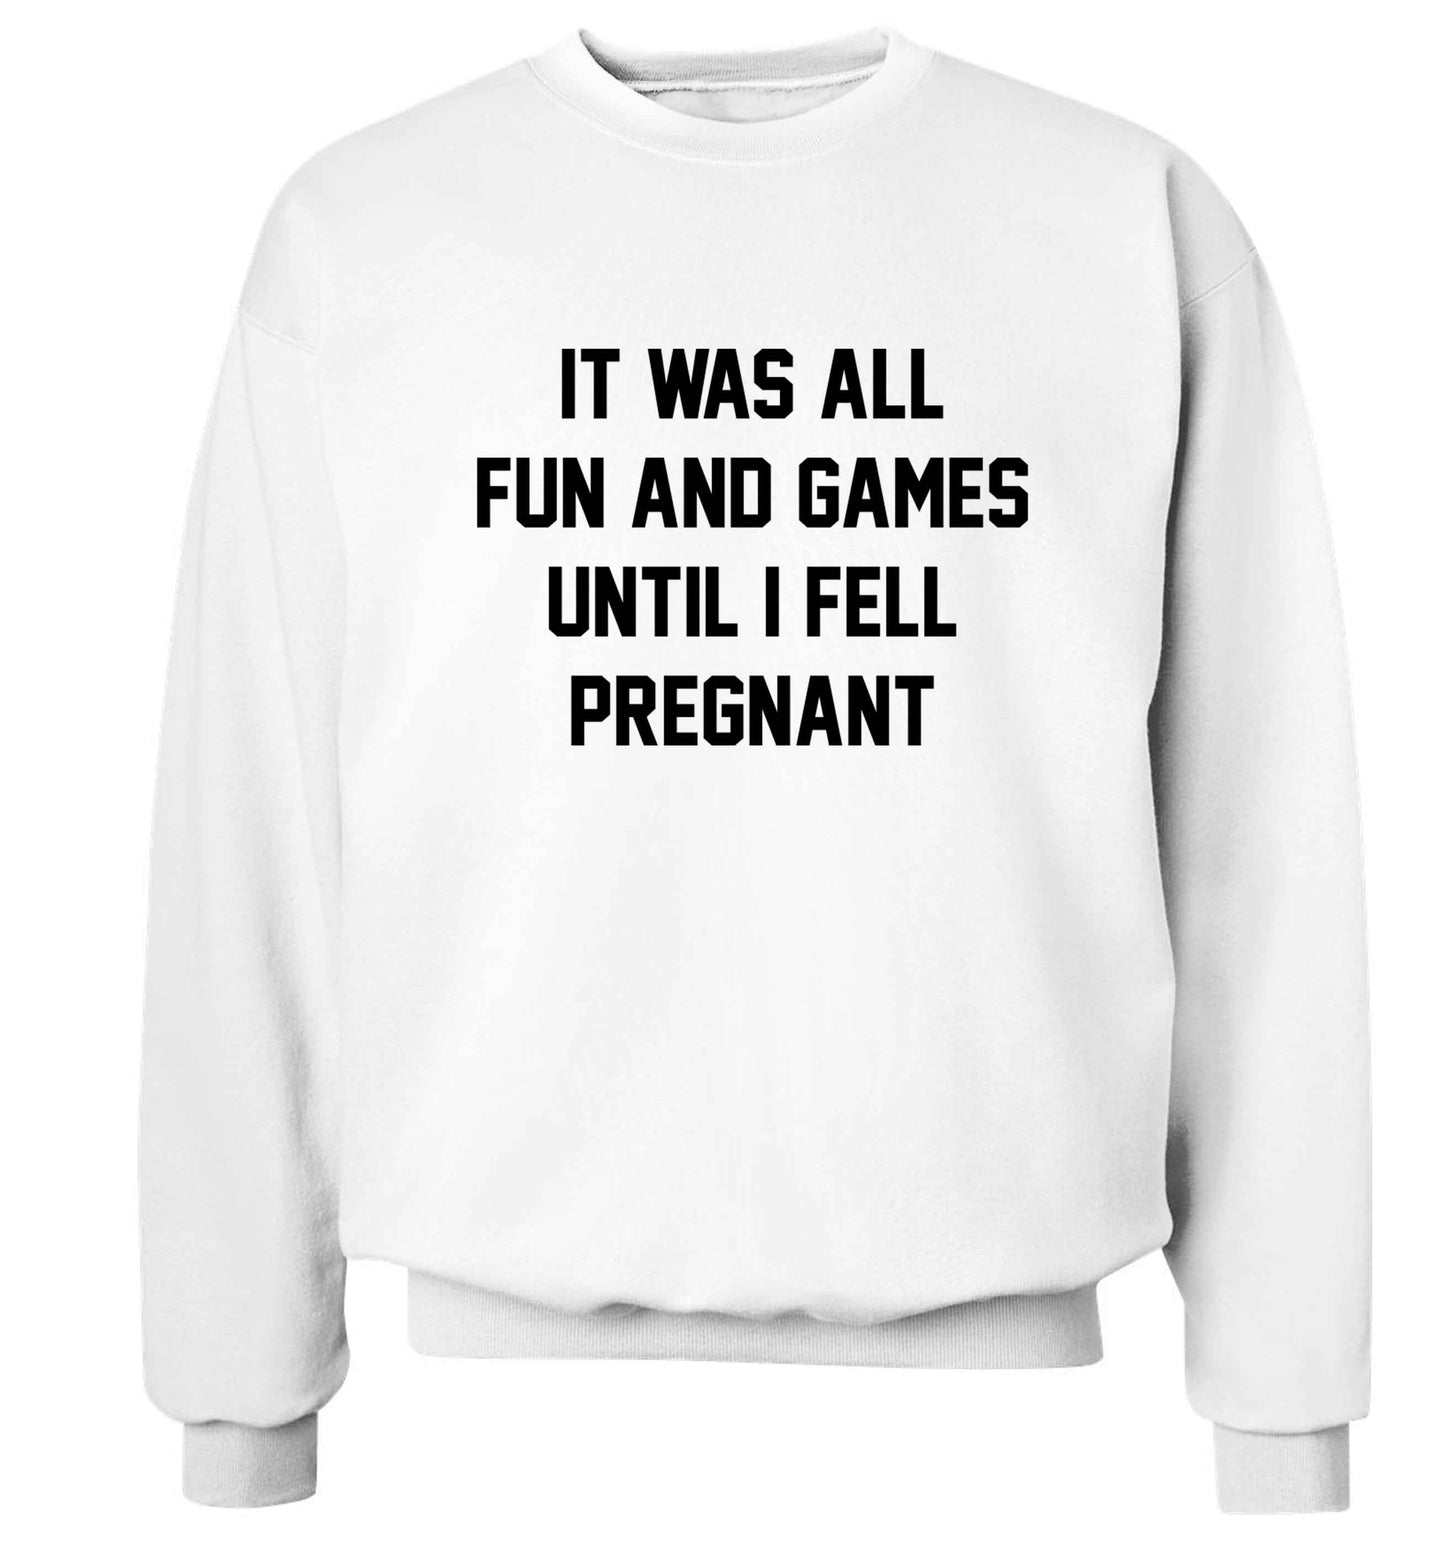 It was all fun and games until I fell pregnant kicks Adult's unisex white Sweater 2XL